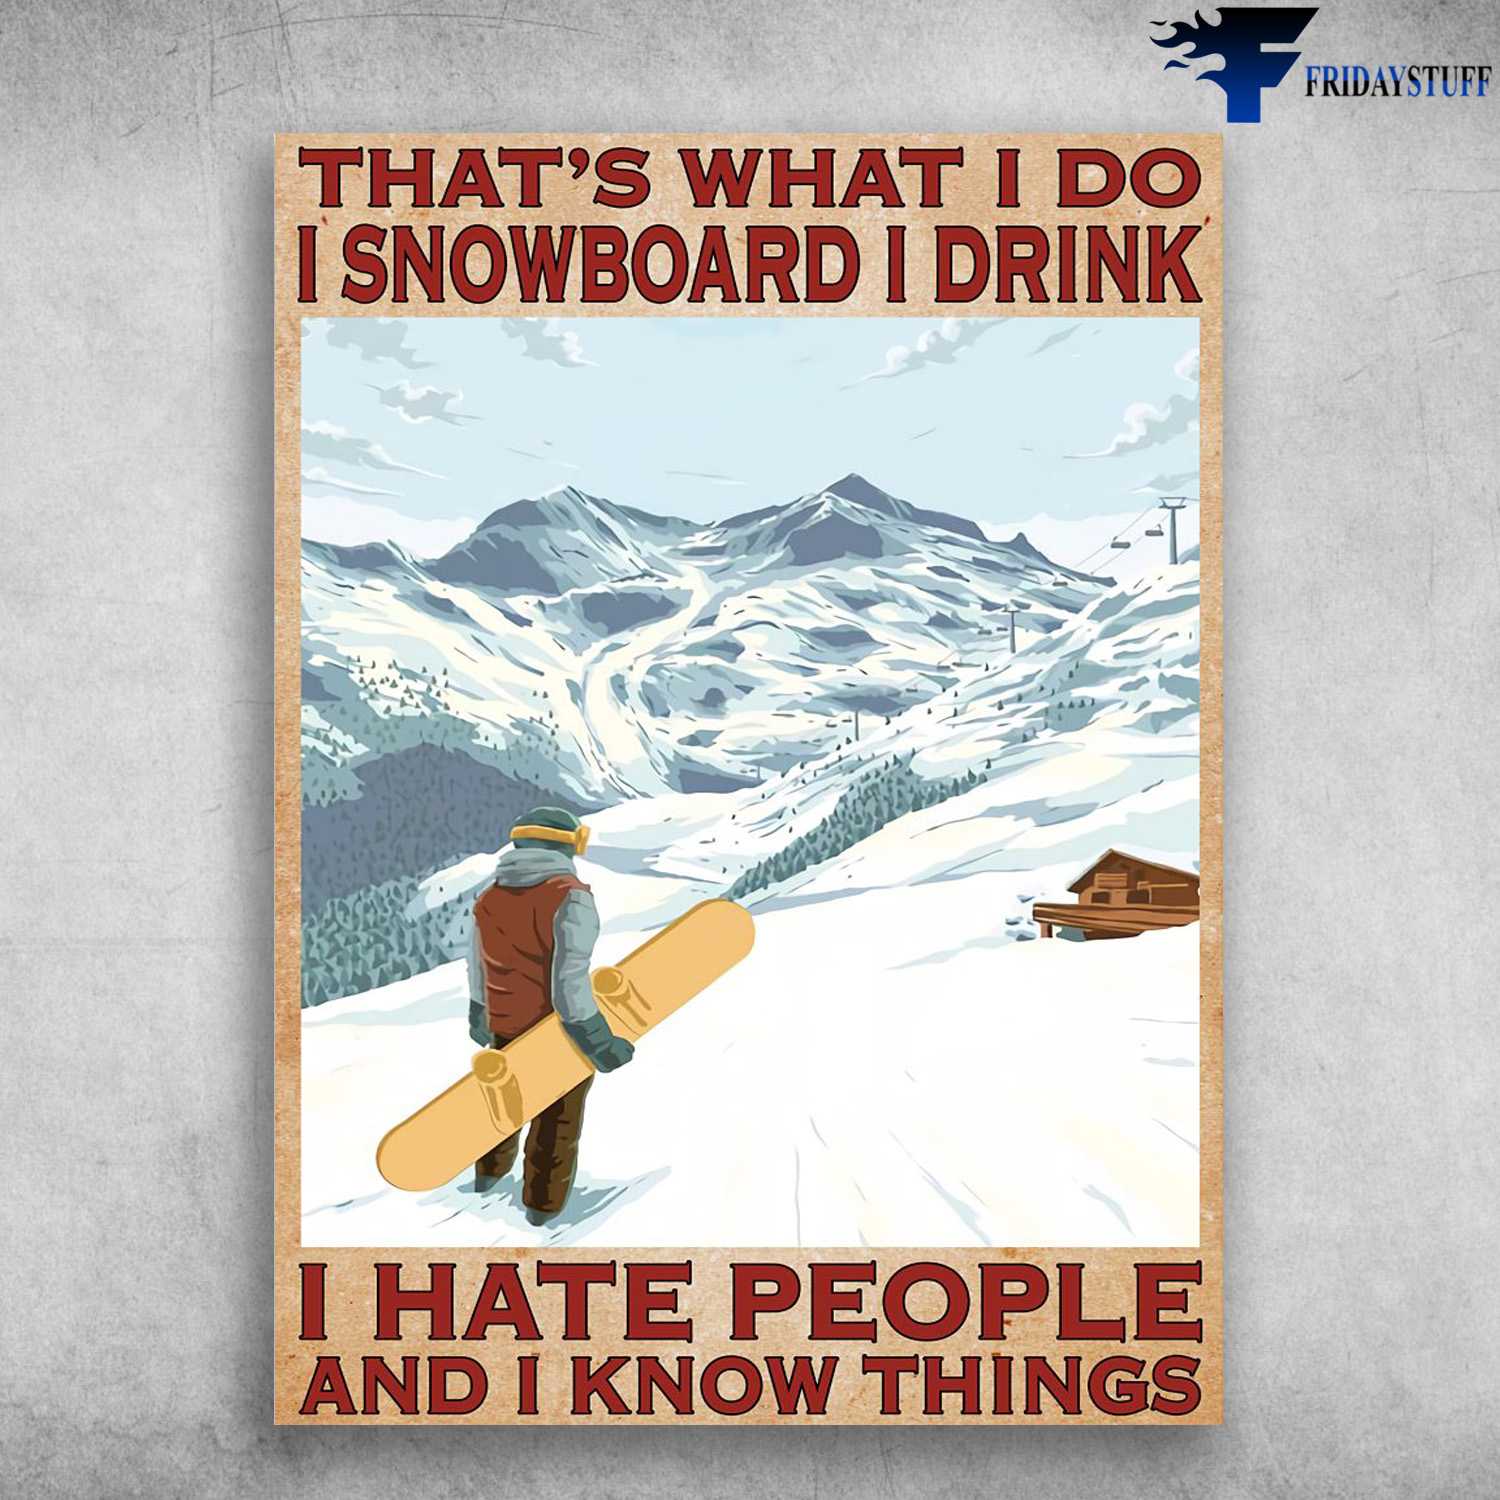 Snowboard Man, Snowboard Poster, That's What I Do, I Drink, I Hate People, And I Know Things